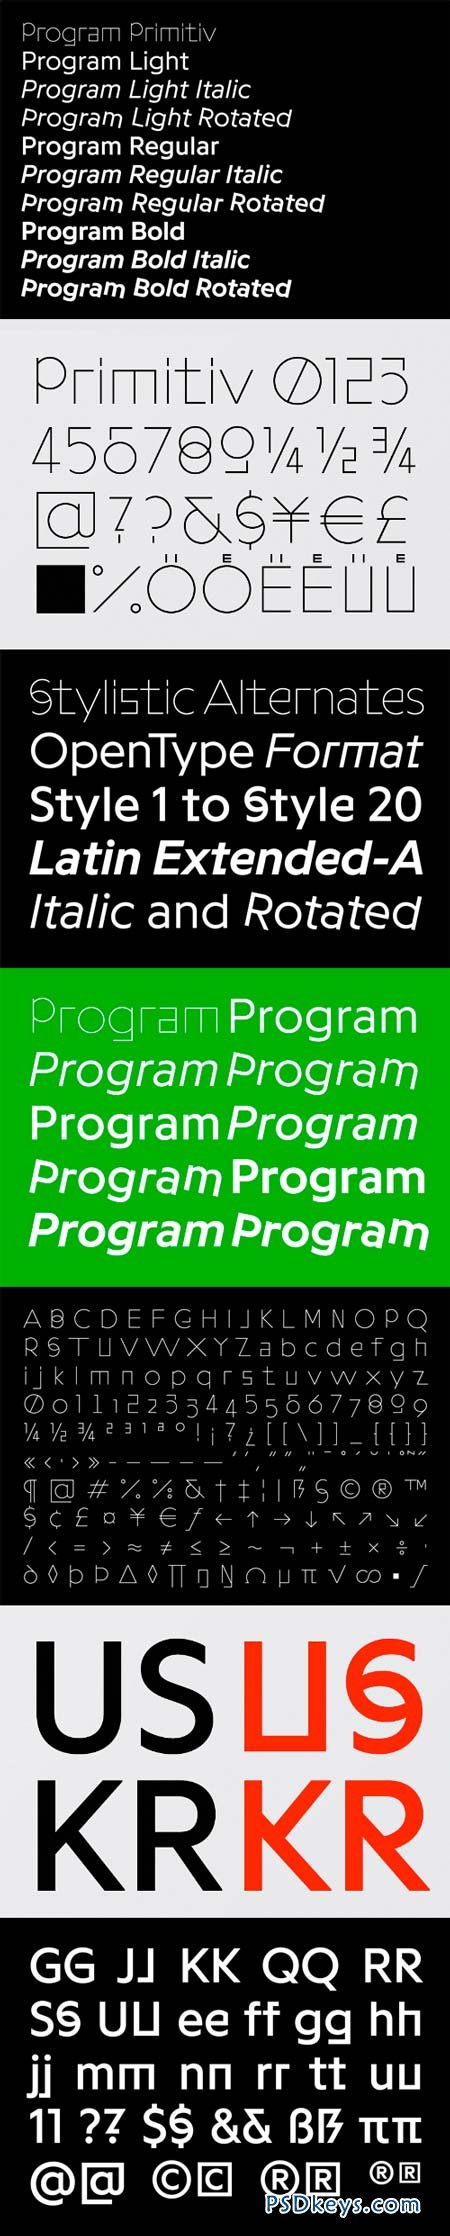 Programme Font Family - 19 Fonts for $516